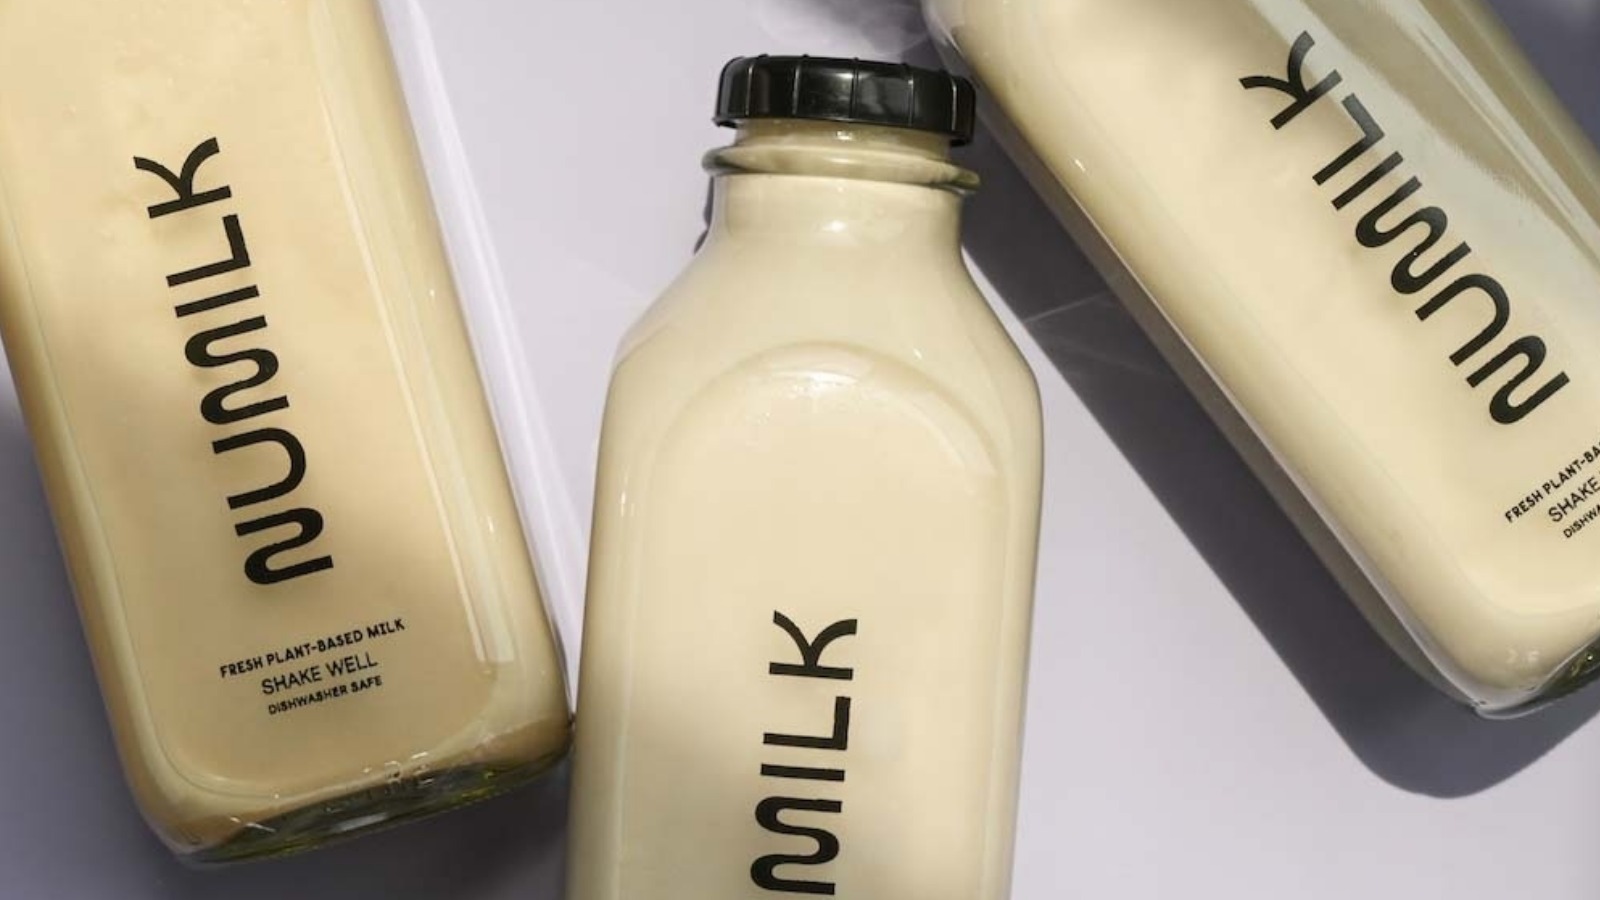 After 'Shark Tank' Rebuff, Healthy Chocolate Milk Startup Slate Closes $5  Million Seed Round